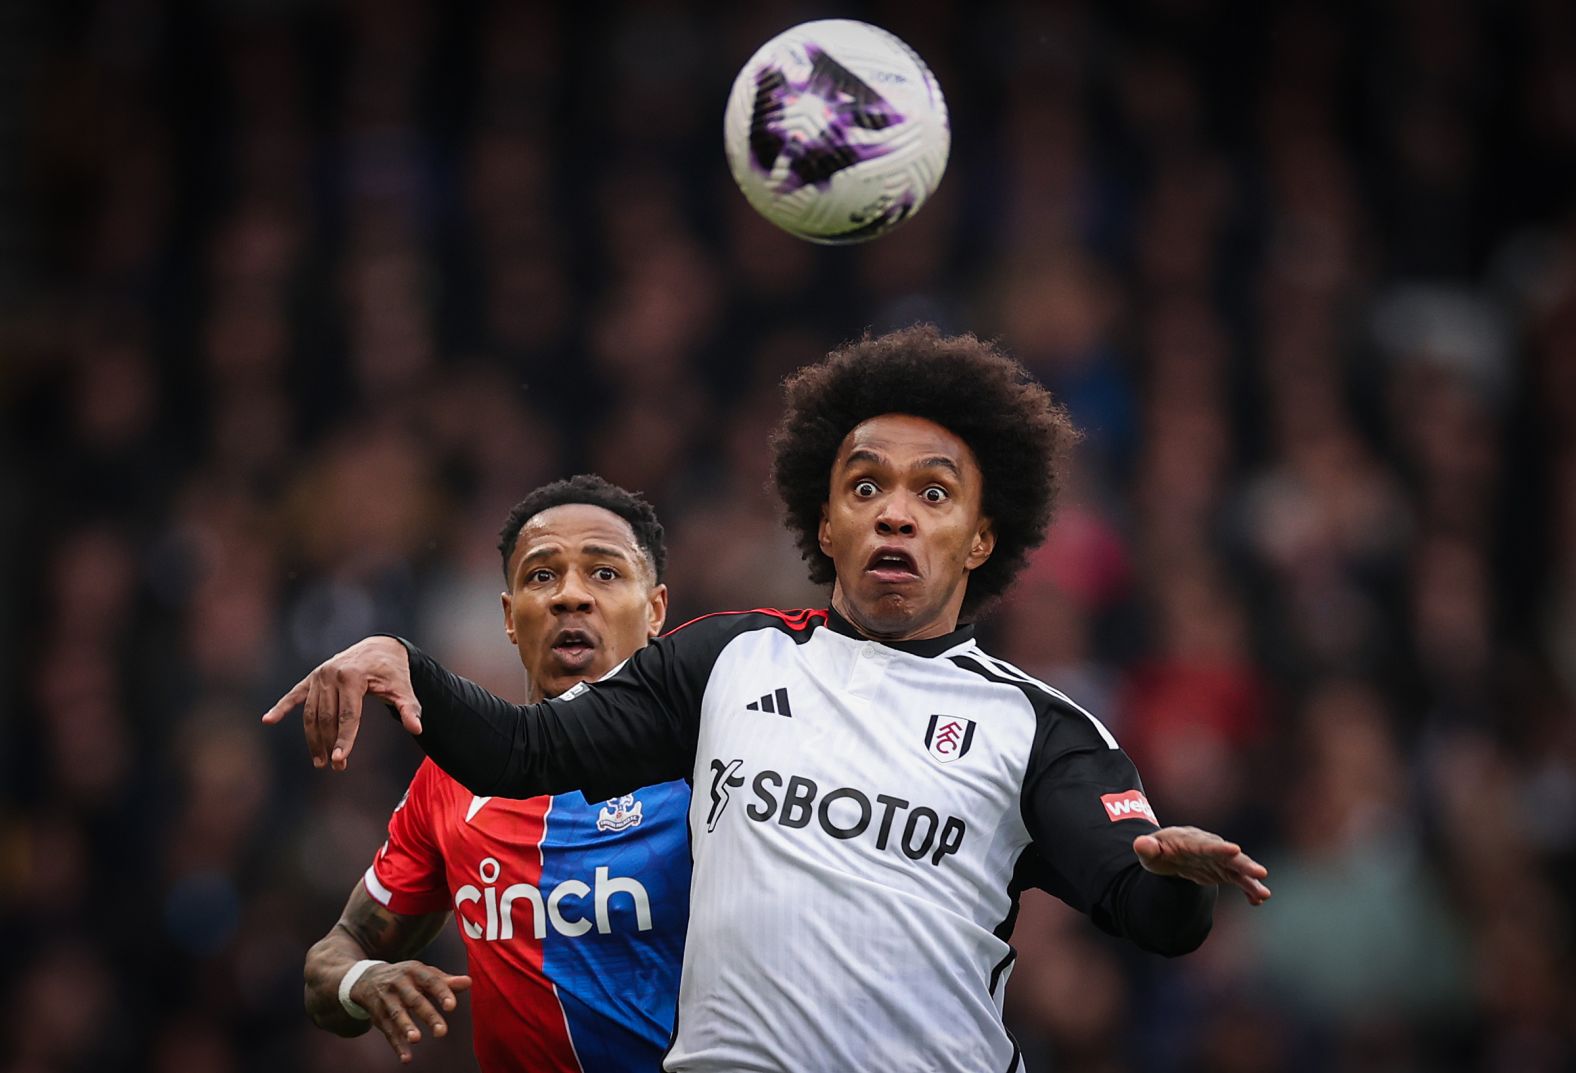 Fulham's Willian, right, is pressured by Crystal Palace's Nathaniel Clyne as he chases a loose ball during a Premier League match in London on Saturday, April 27.